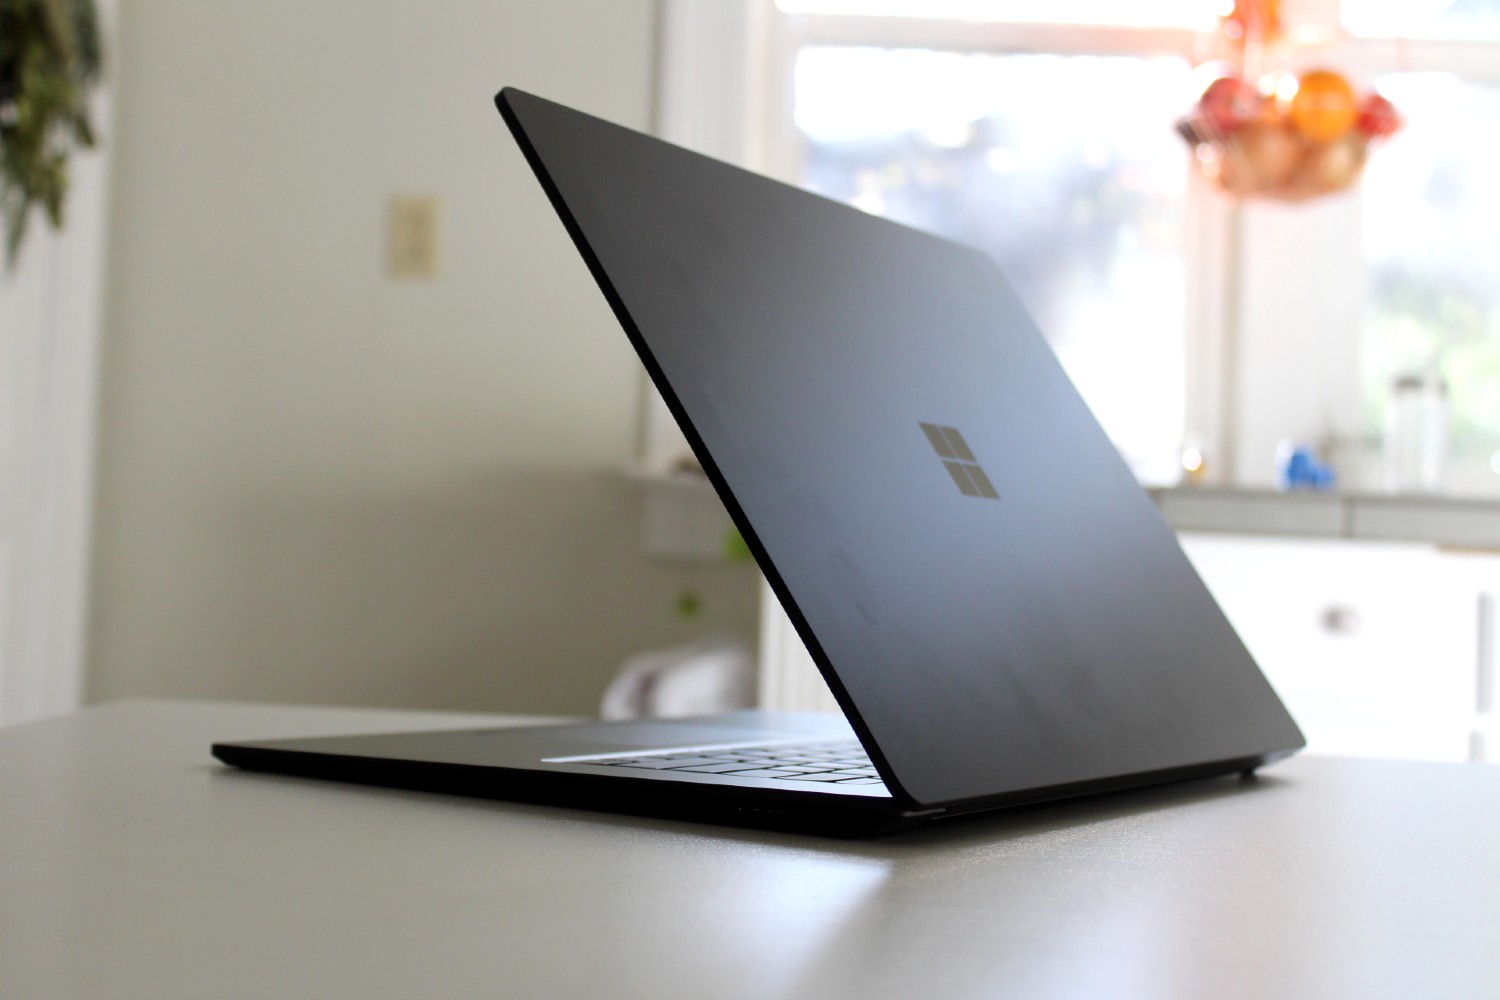 The back of the Microsoft Surface Laptop 4.